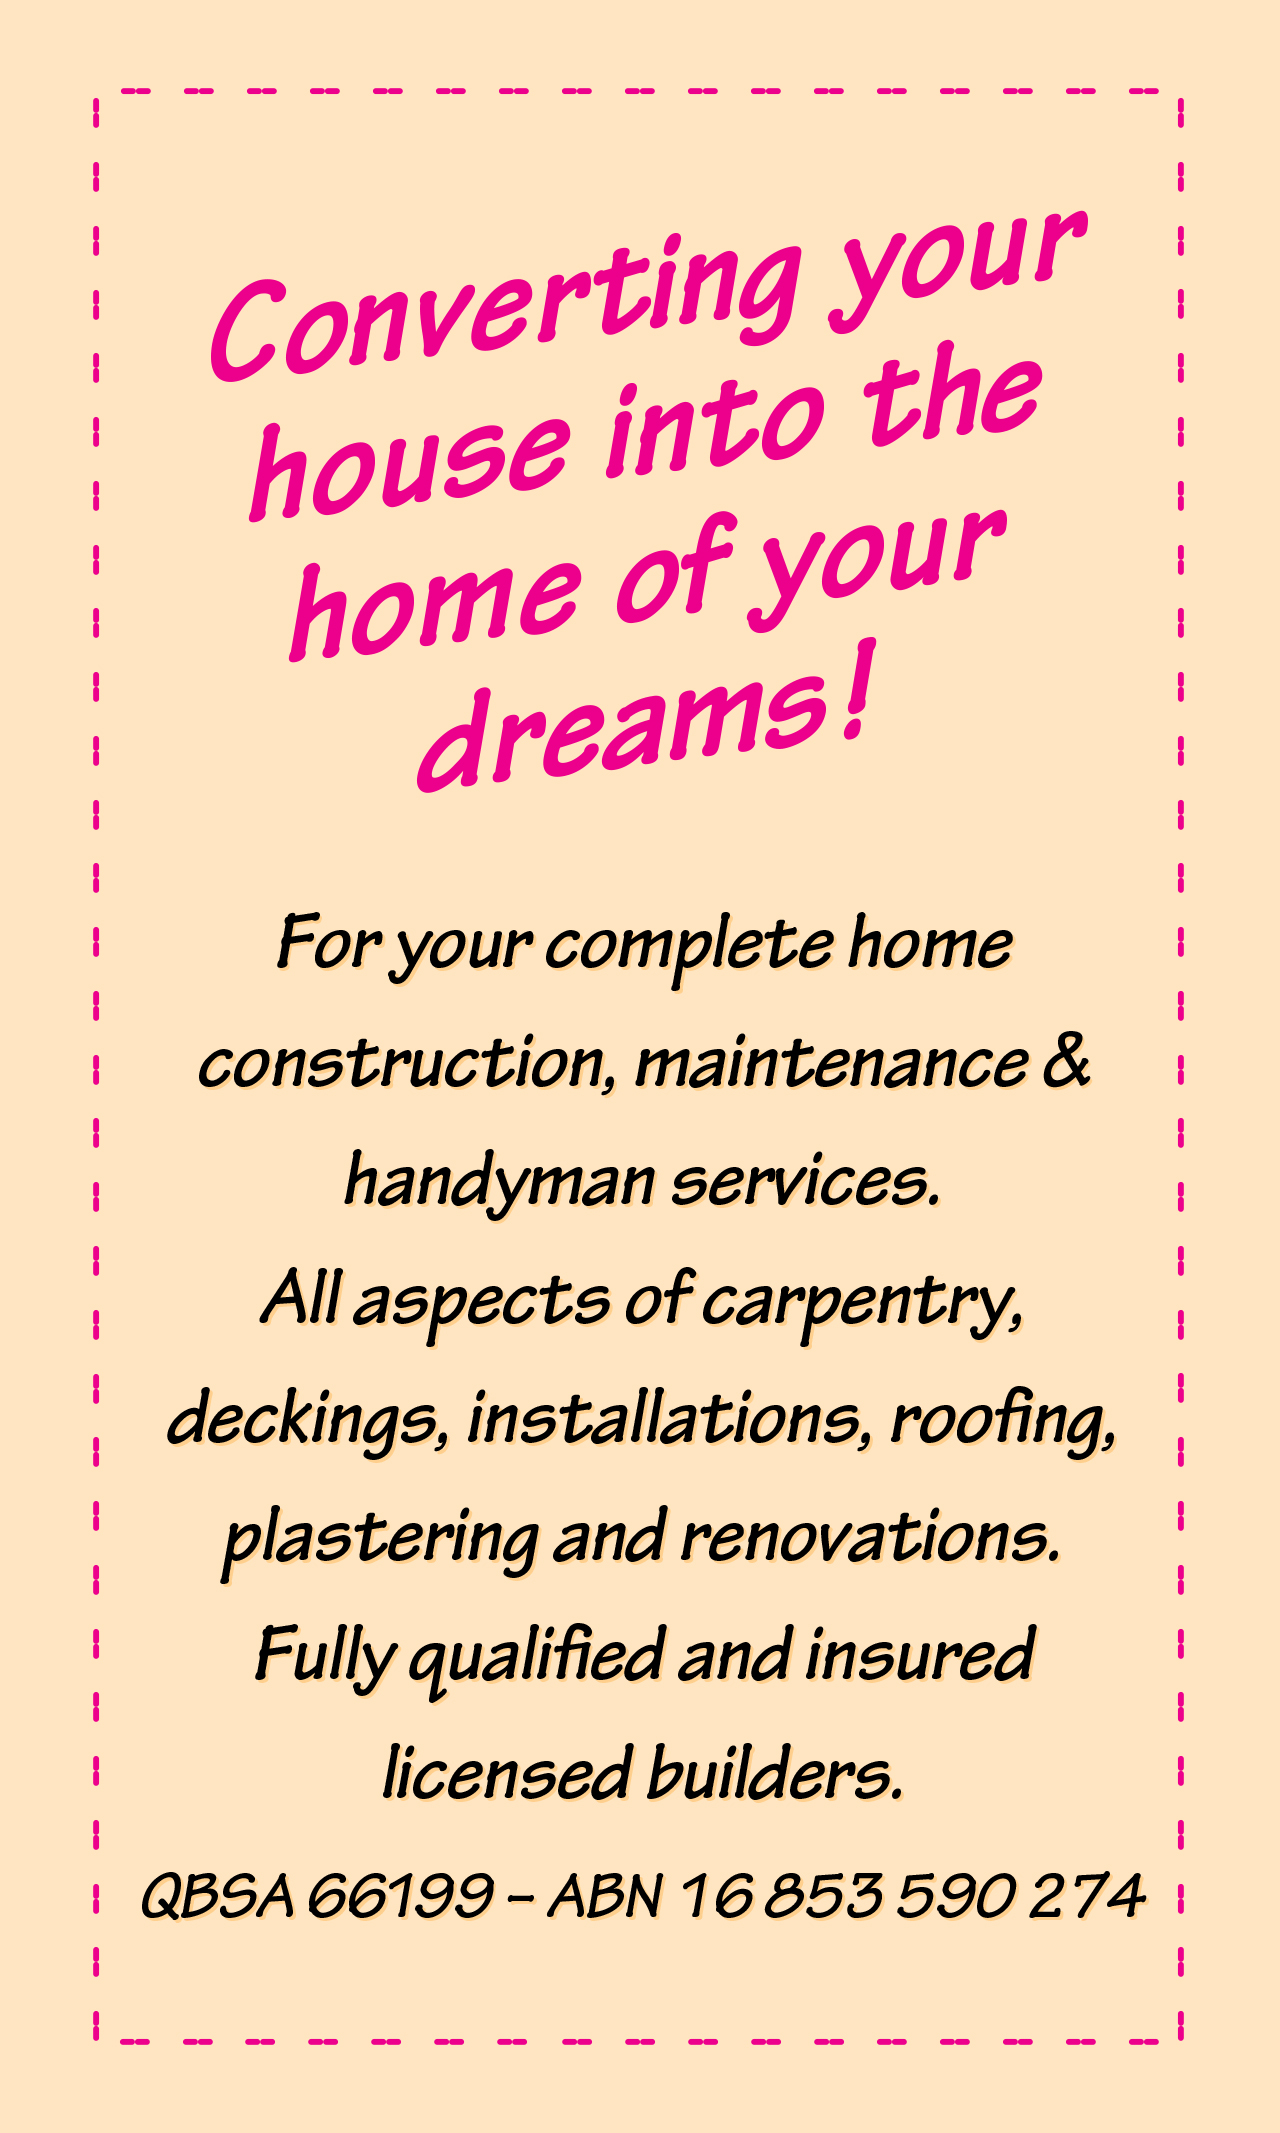 ﻿Converting your house into the home of your dreams! For your complete home construction, maintenance & handyman services.All aspects of carpentry, deckings, installations, roofing, plastering and renovations.Fully qualified and insured licensed builders. QBSA 66199 – ABN 1683 590 274